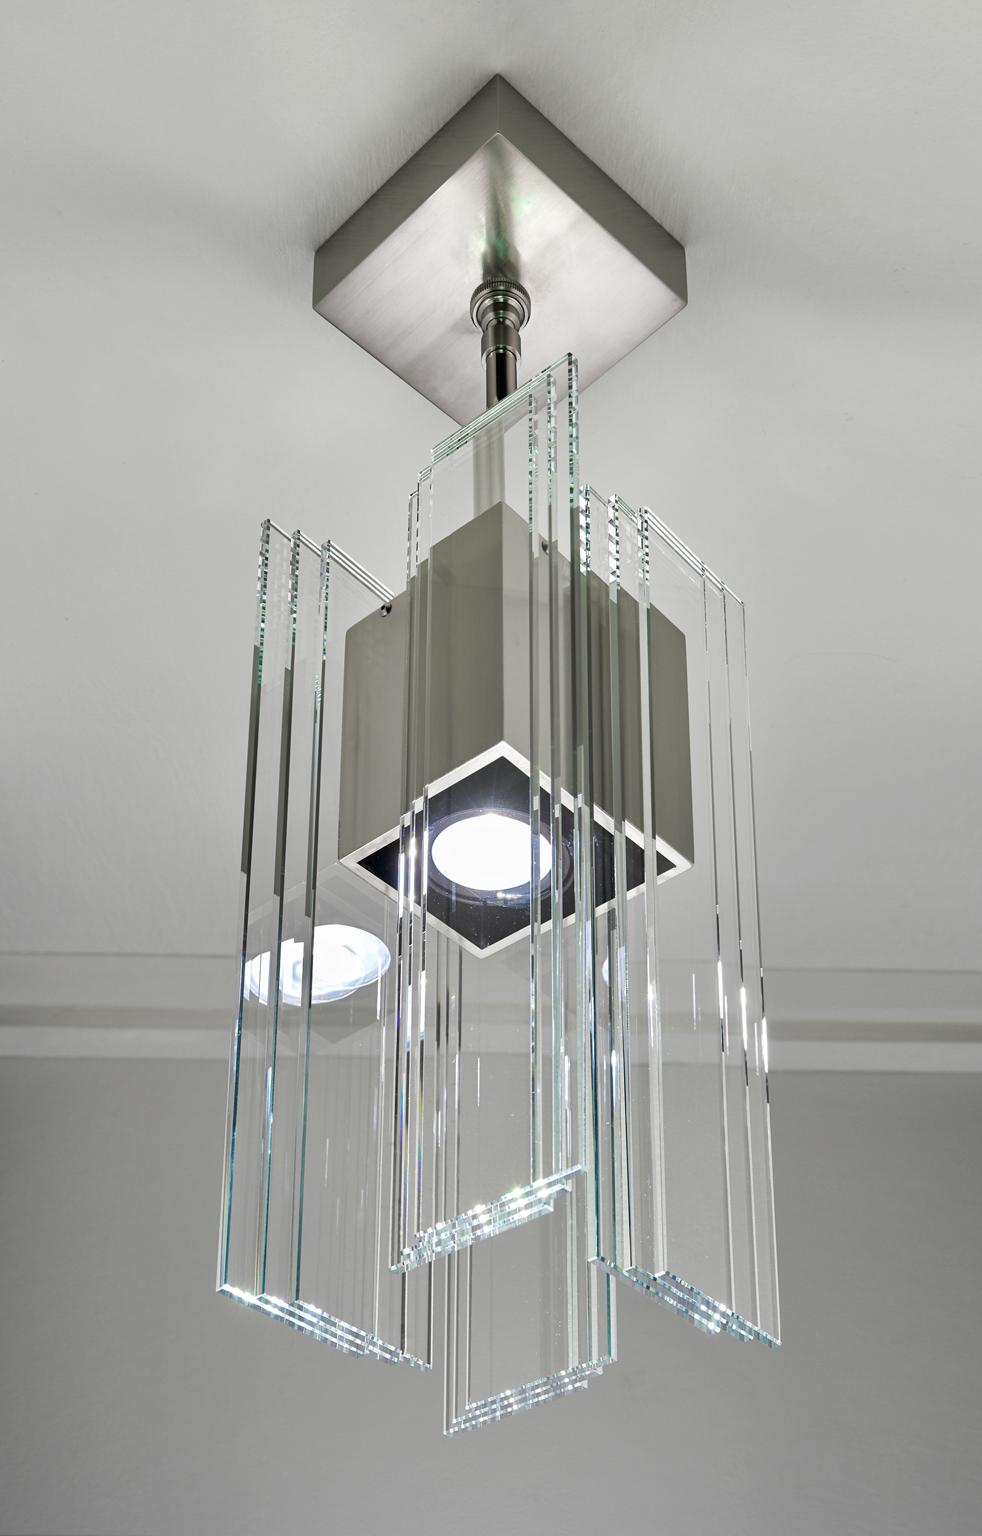 Designed and created by Sidney Hutter glass and light, this pendant has an ultra contemporary style that looks good in any environment. The pendant is created by laminating clear glass pieces using UV adhesive to the nickel plated aluminum housing.